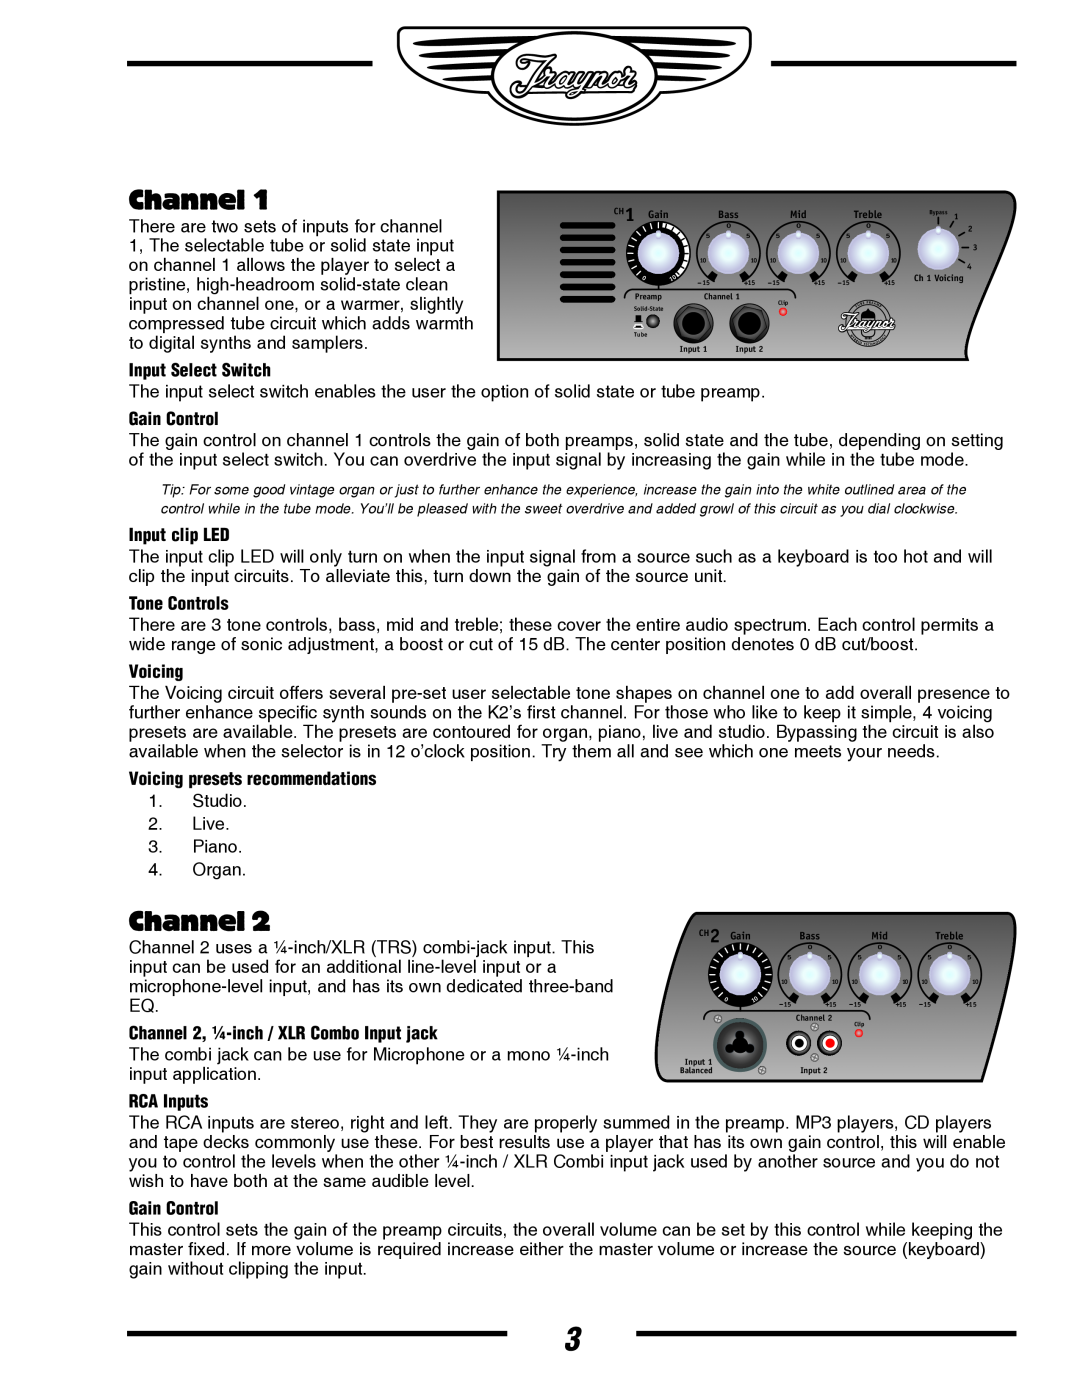 Yorkville Sound YS1044 Channel, Input Select Switch, Gain Control, Input clip LED, Tone Controls, Voicing, RCA Inputs 